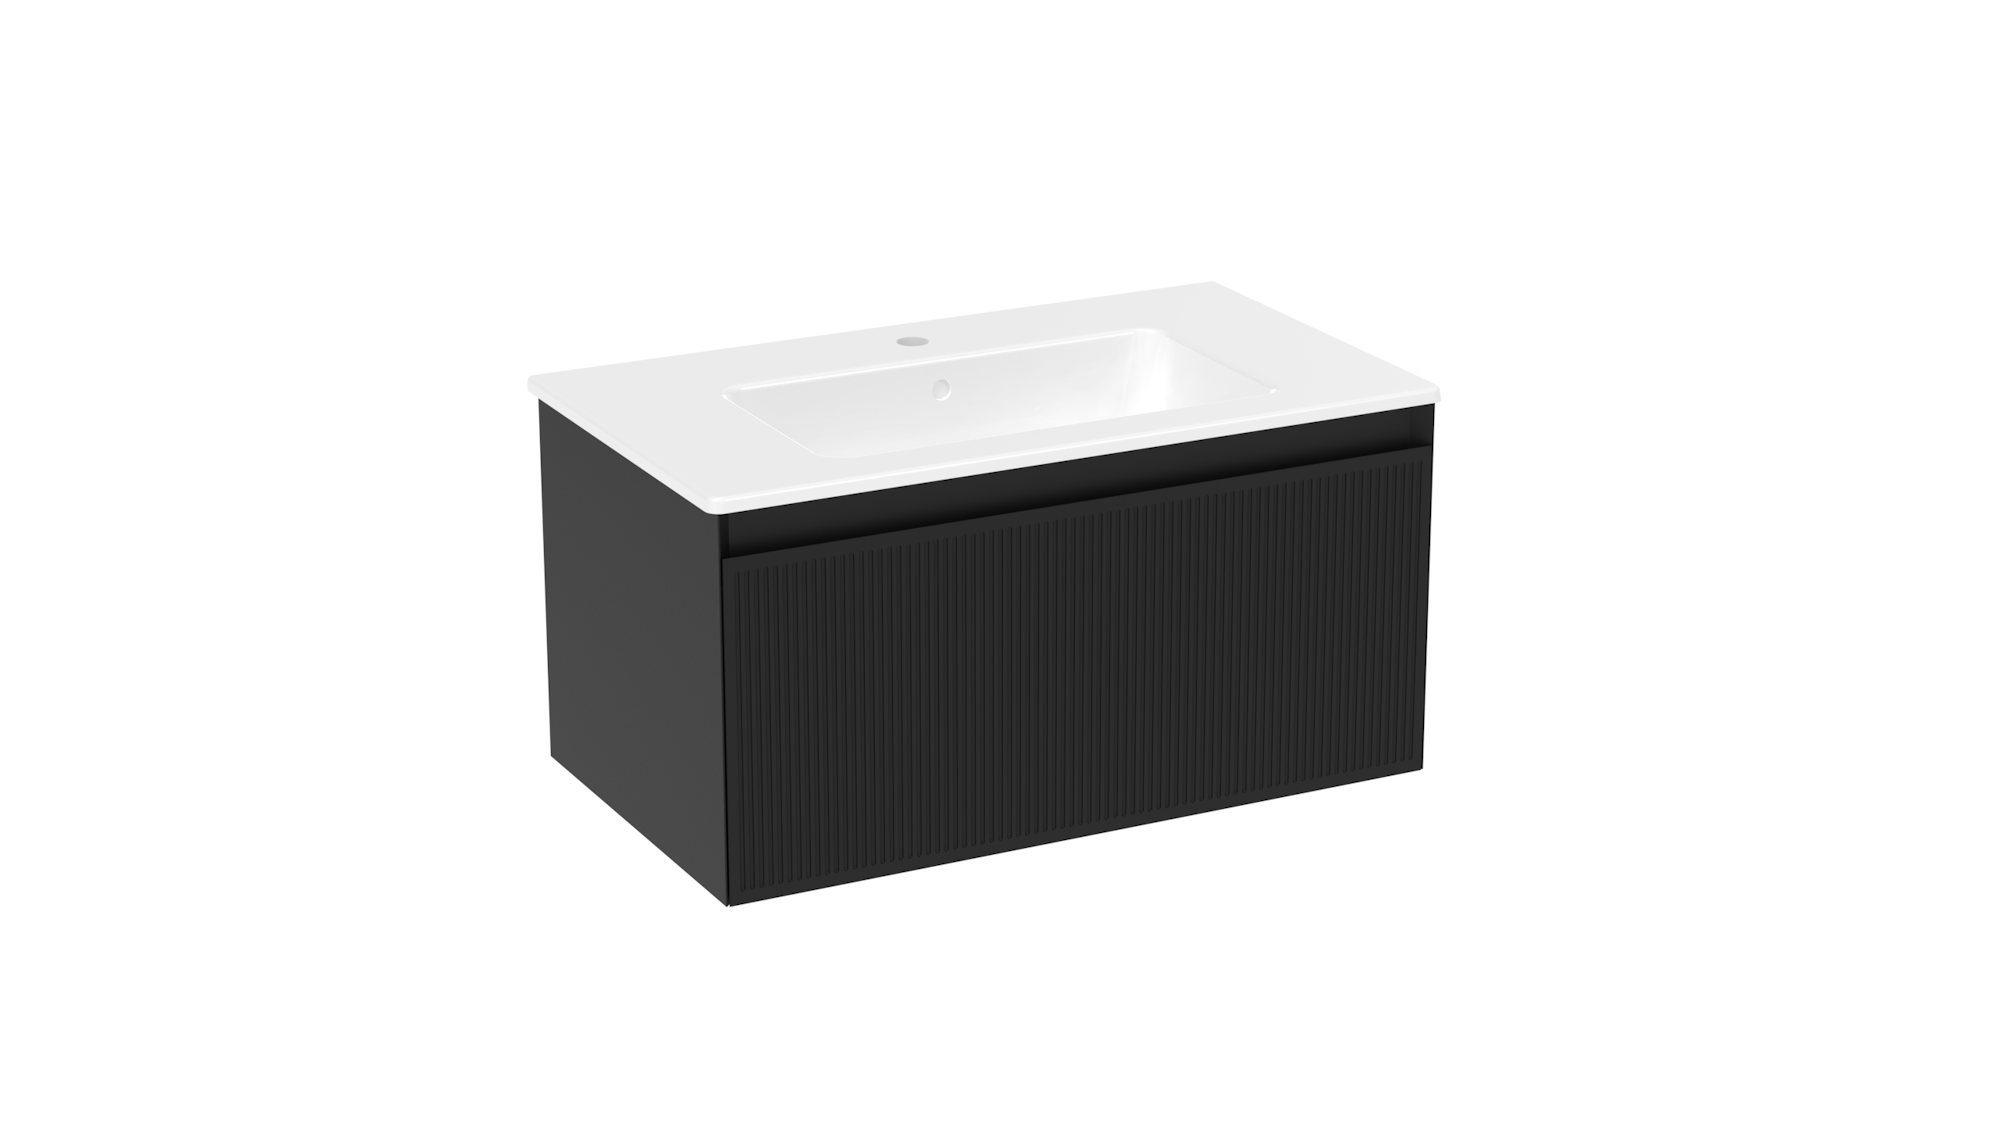 MONUMENT 80cm 1 drawer wall mounted unit - Matte Black